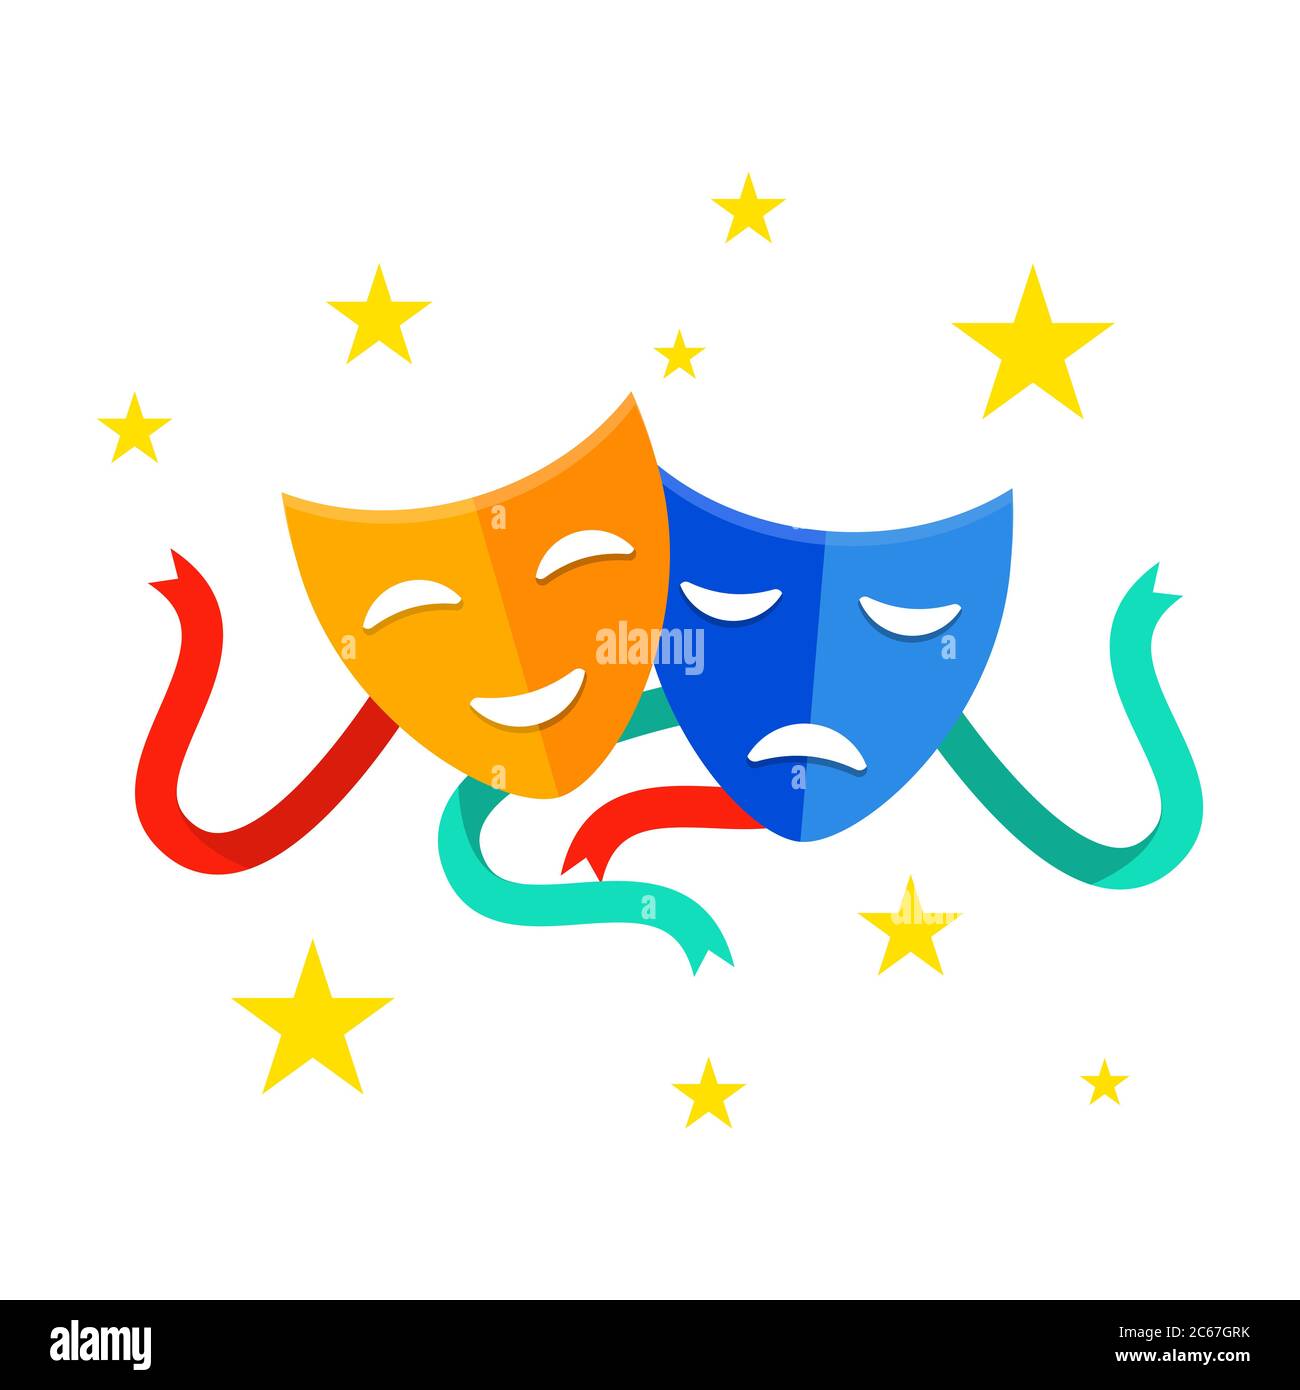 https://c8.alamy.com/comp/2C67GRK/theater-mask-with-ribbons-comedy-and-tragedy-masks-isolated-on-white-background-traditional-theater-symbol-theater-happy-and-sad-mask-icon-vector-2C67GRK.jpg